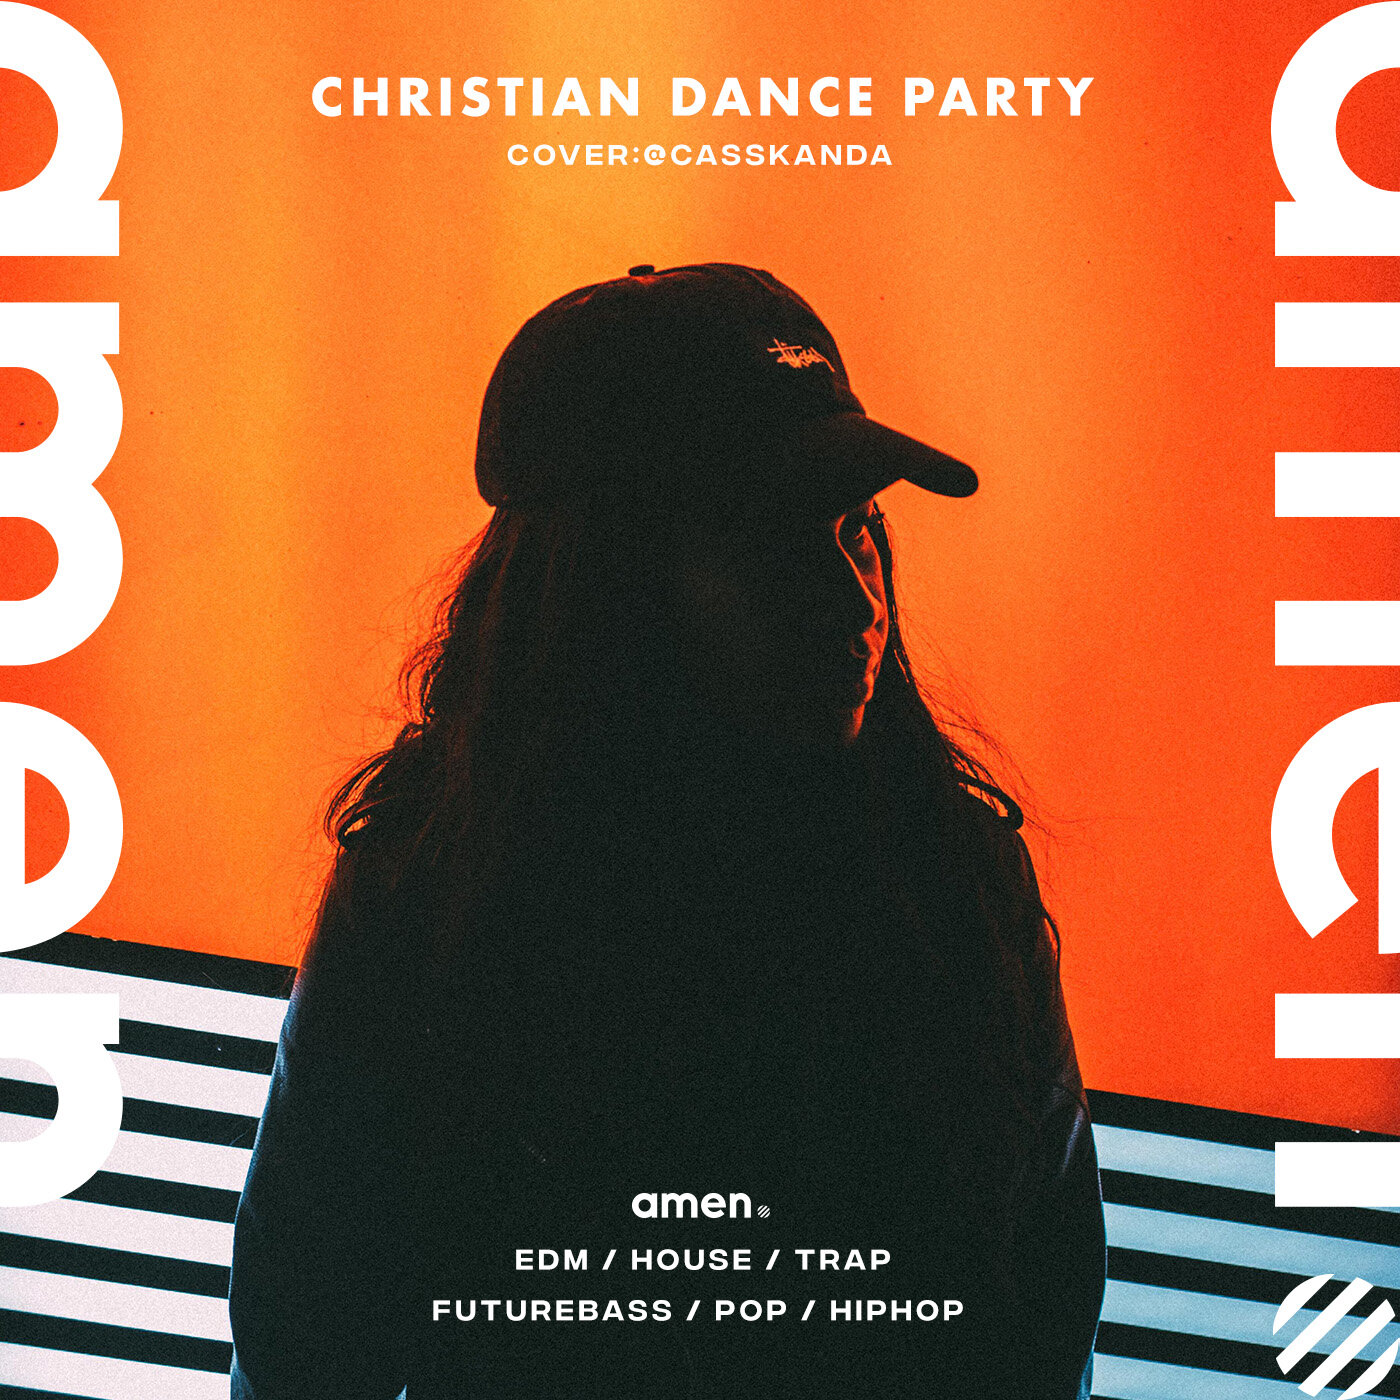 Christian Dance Party Square.jpg